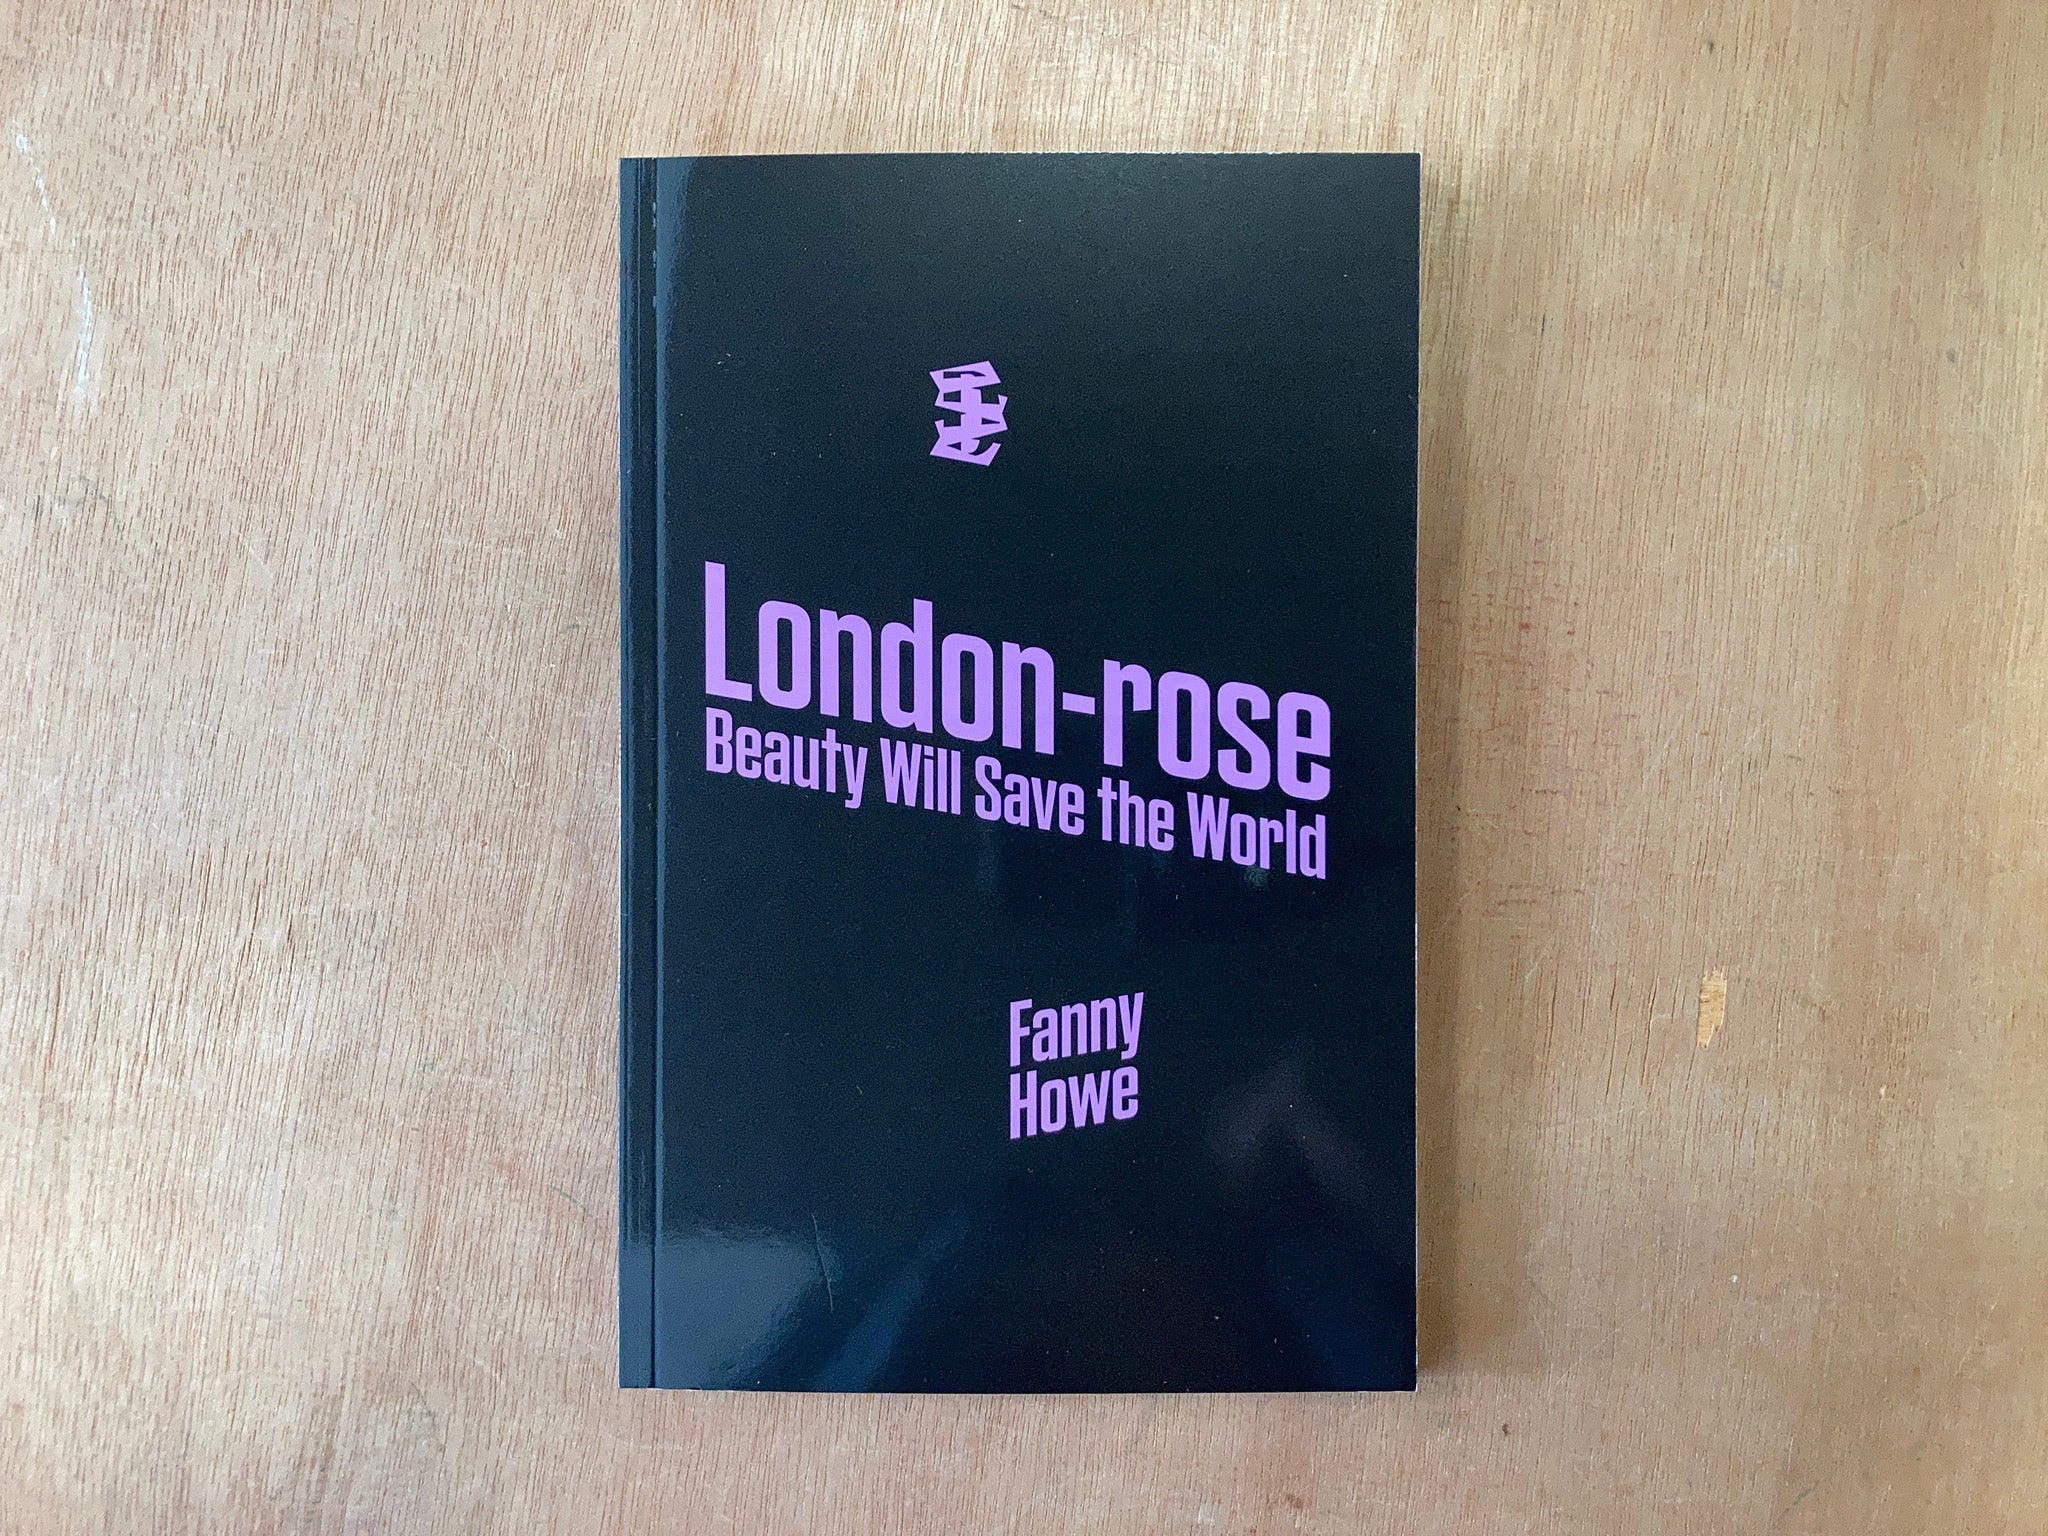 LONDON-ROSE | BEAUTY WILL SAVE THE WORLD by Fanny Howe